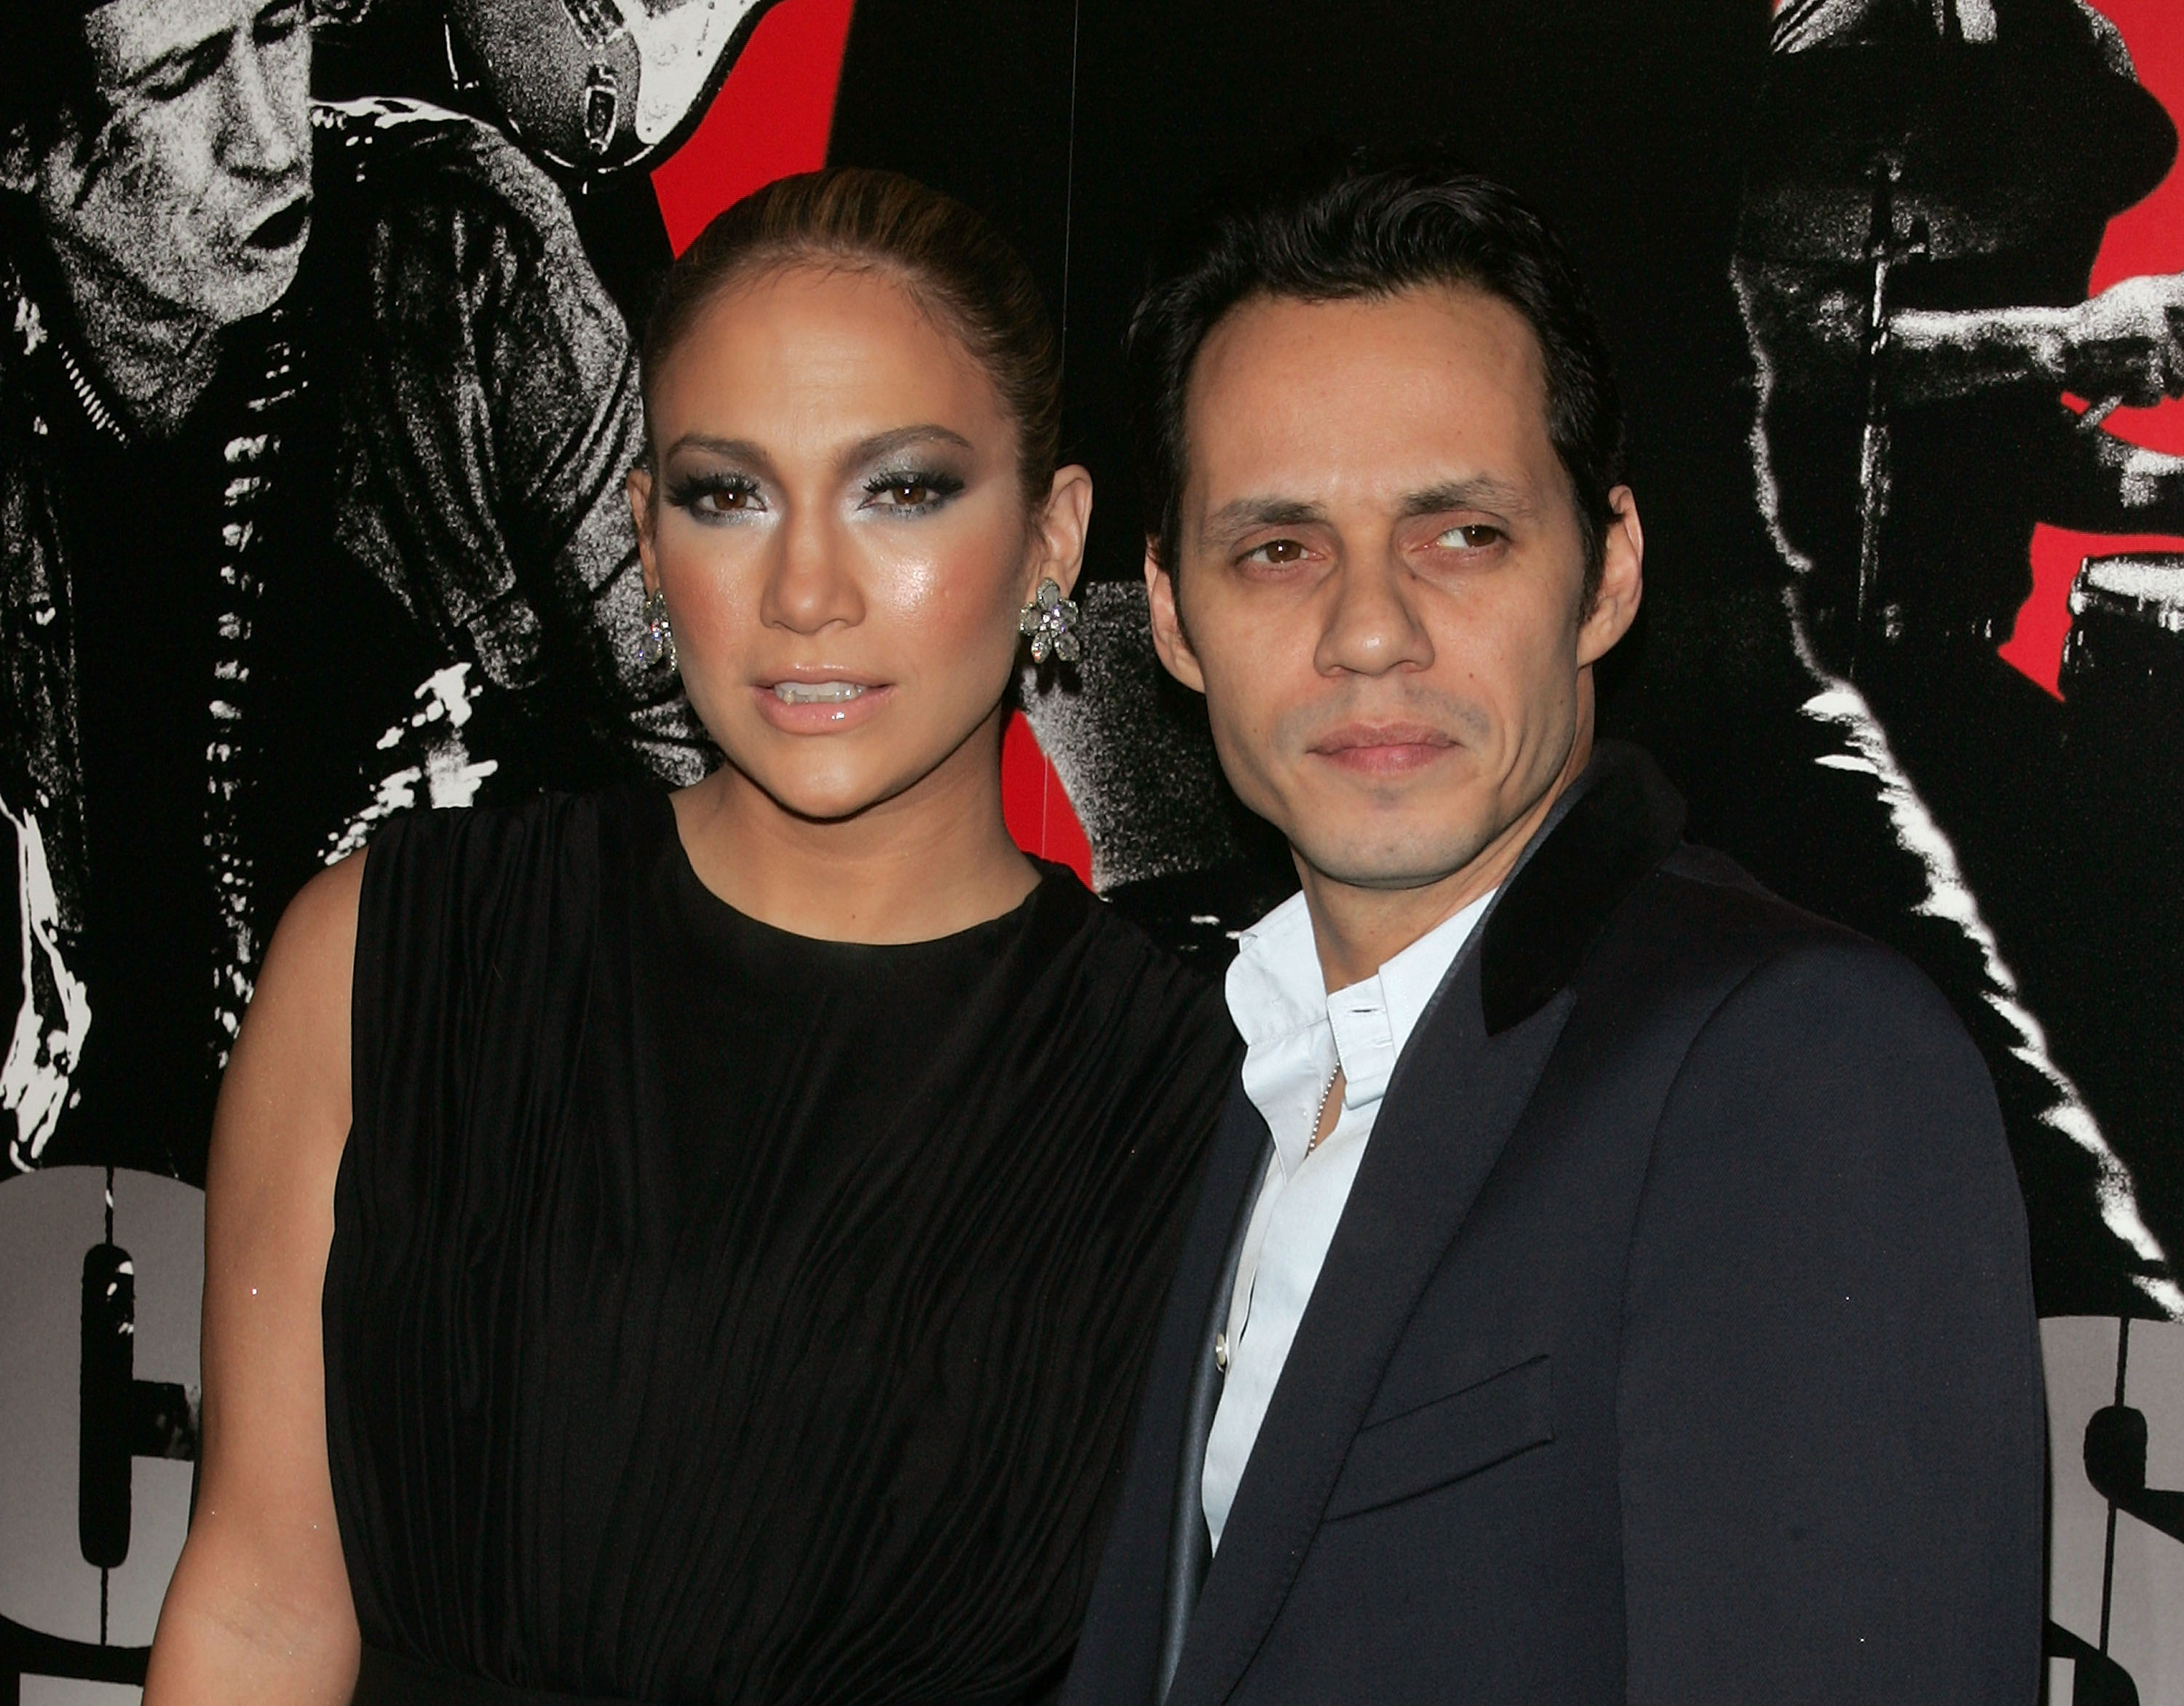 Jennifer Lopez and Marc Anthony at an event